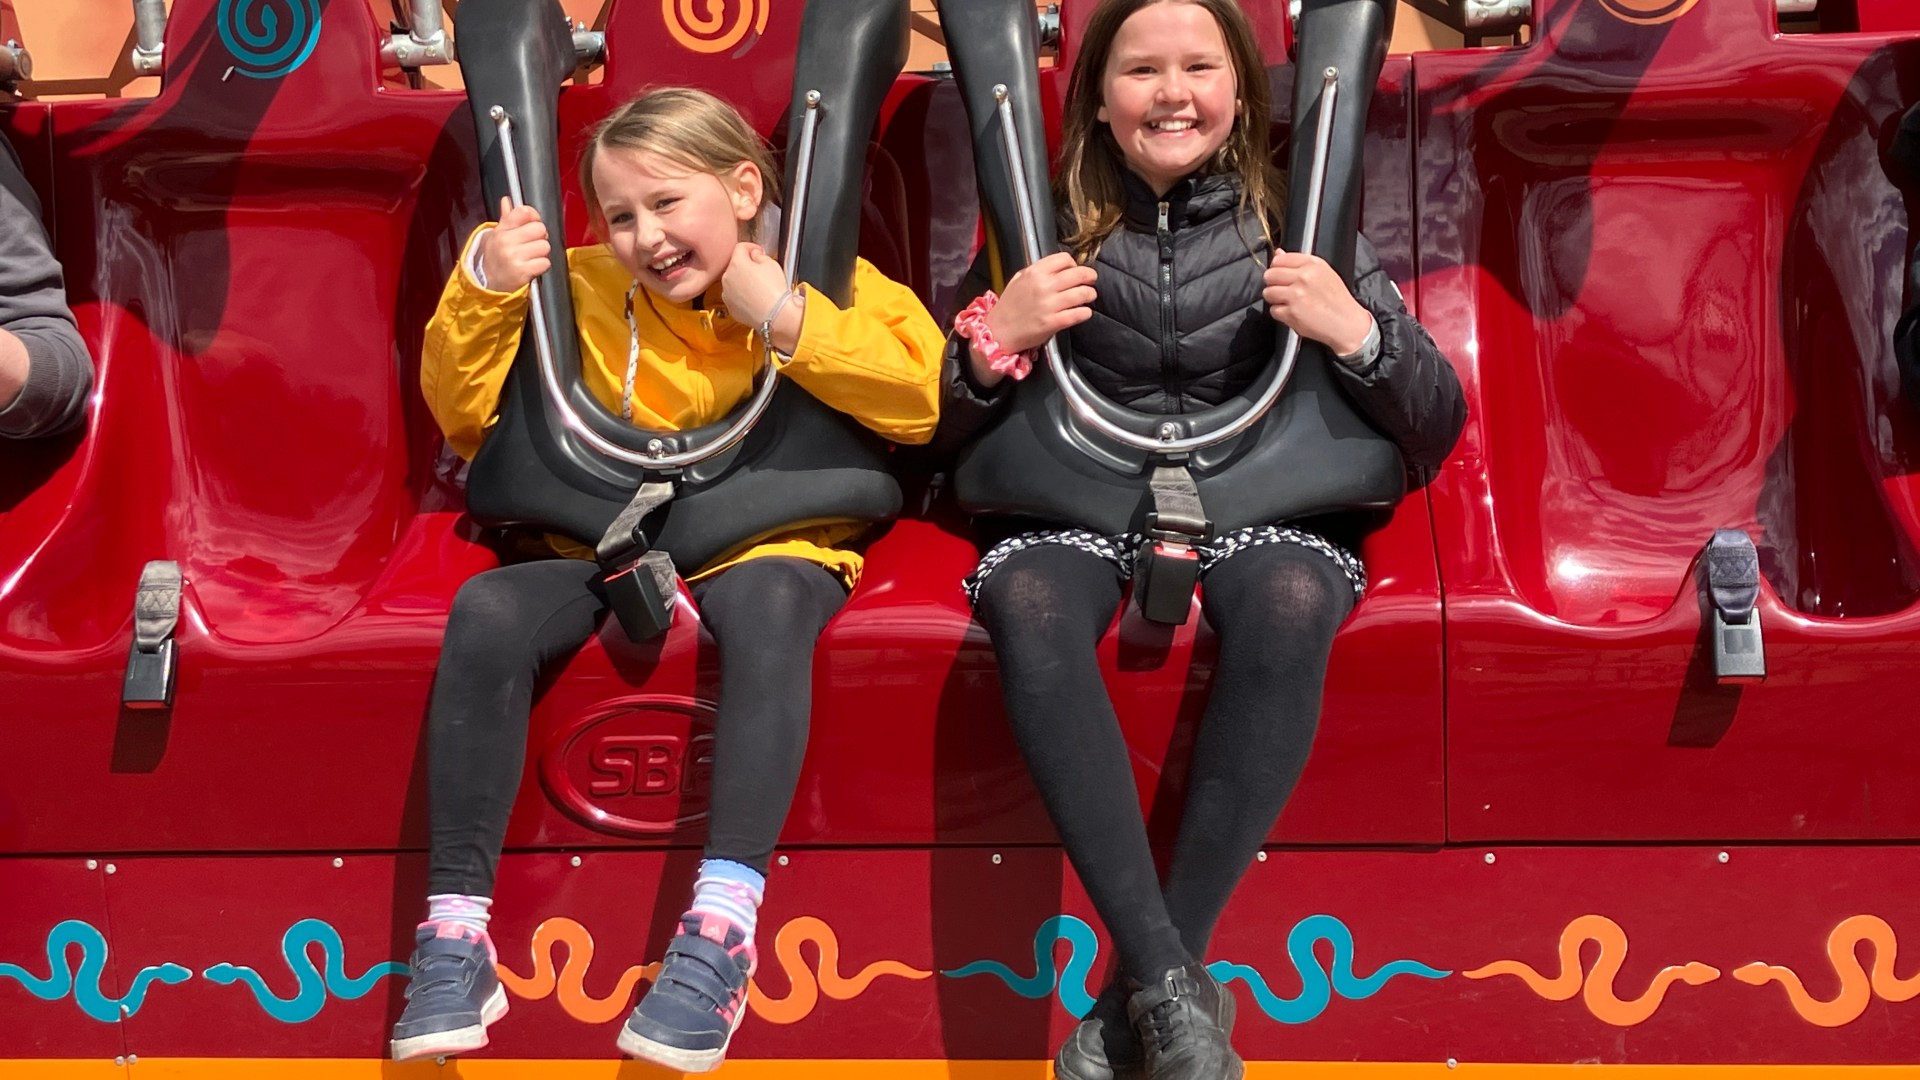 Shocking Reaction at Chessington World of Adventures: Kids Reveal Top Rides as Mum’s Face Goes Wild!